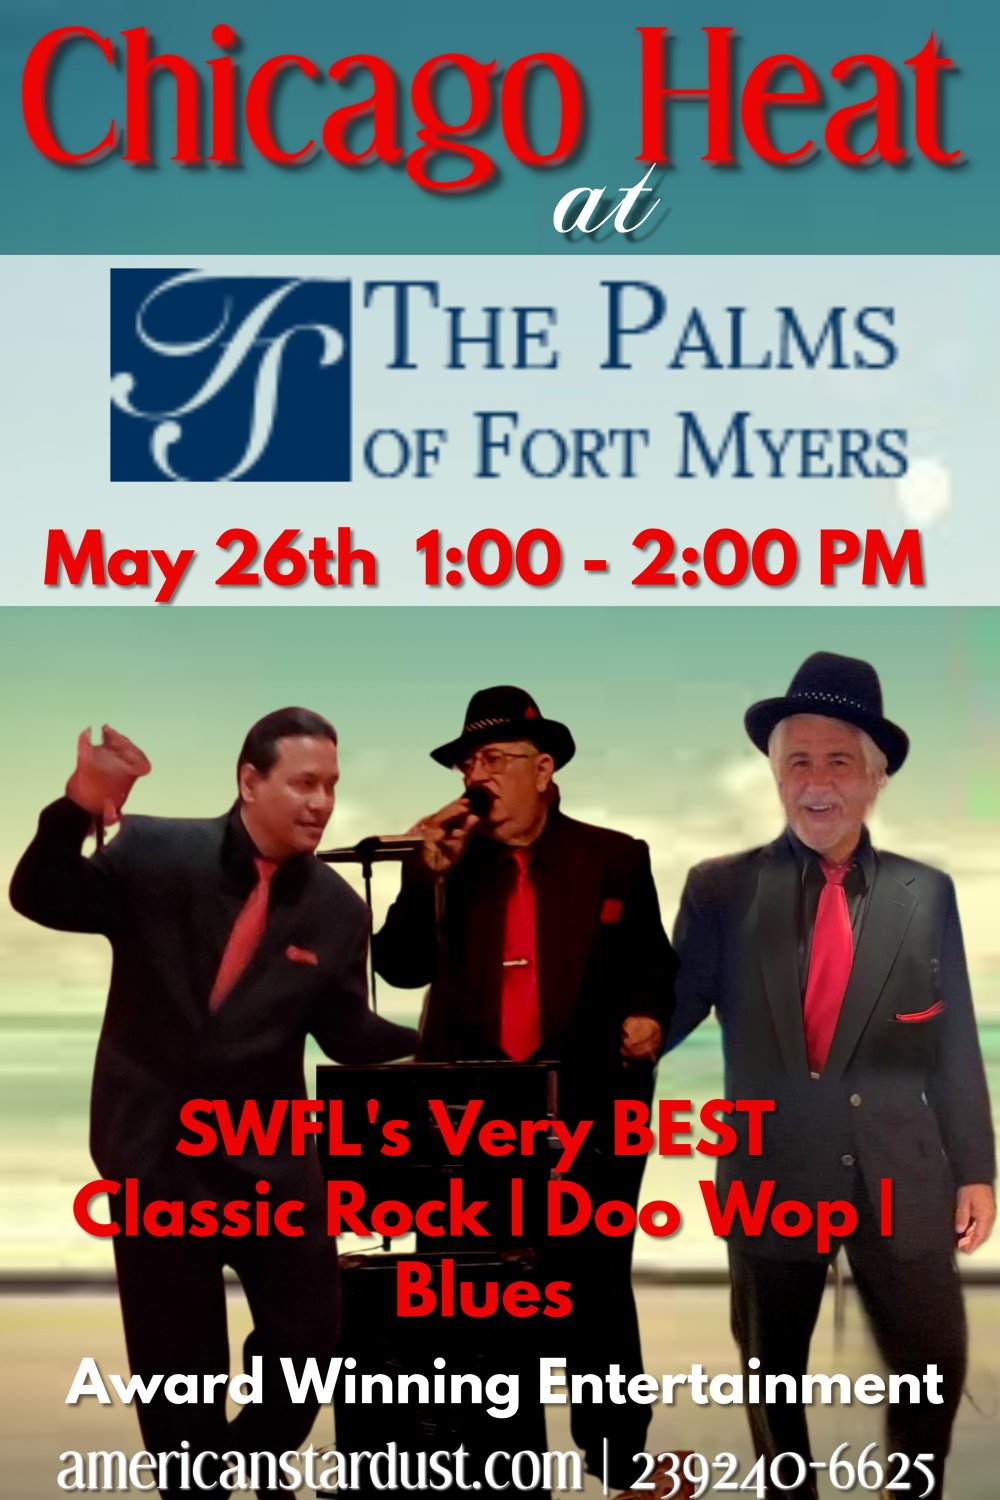 Palms of Fort Myers may 26.jpg